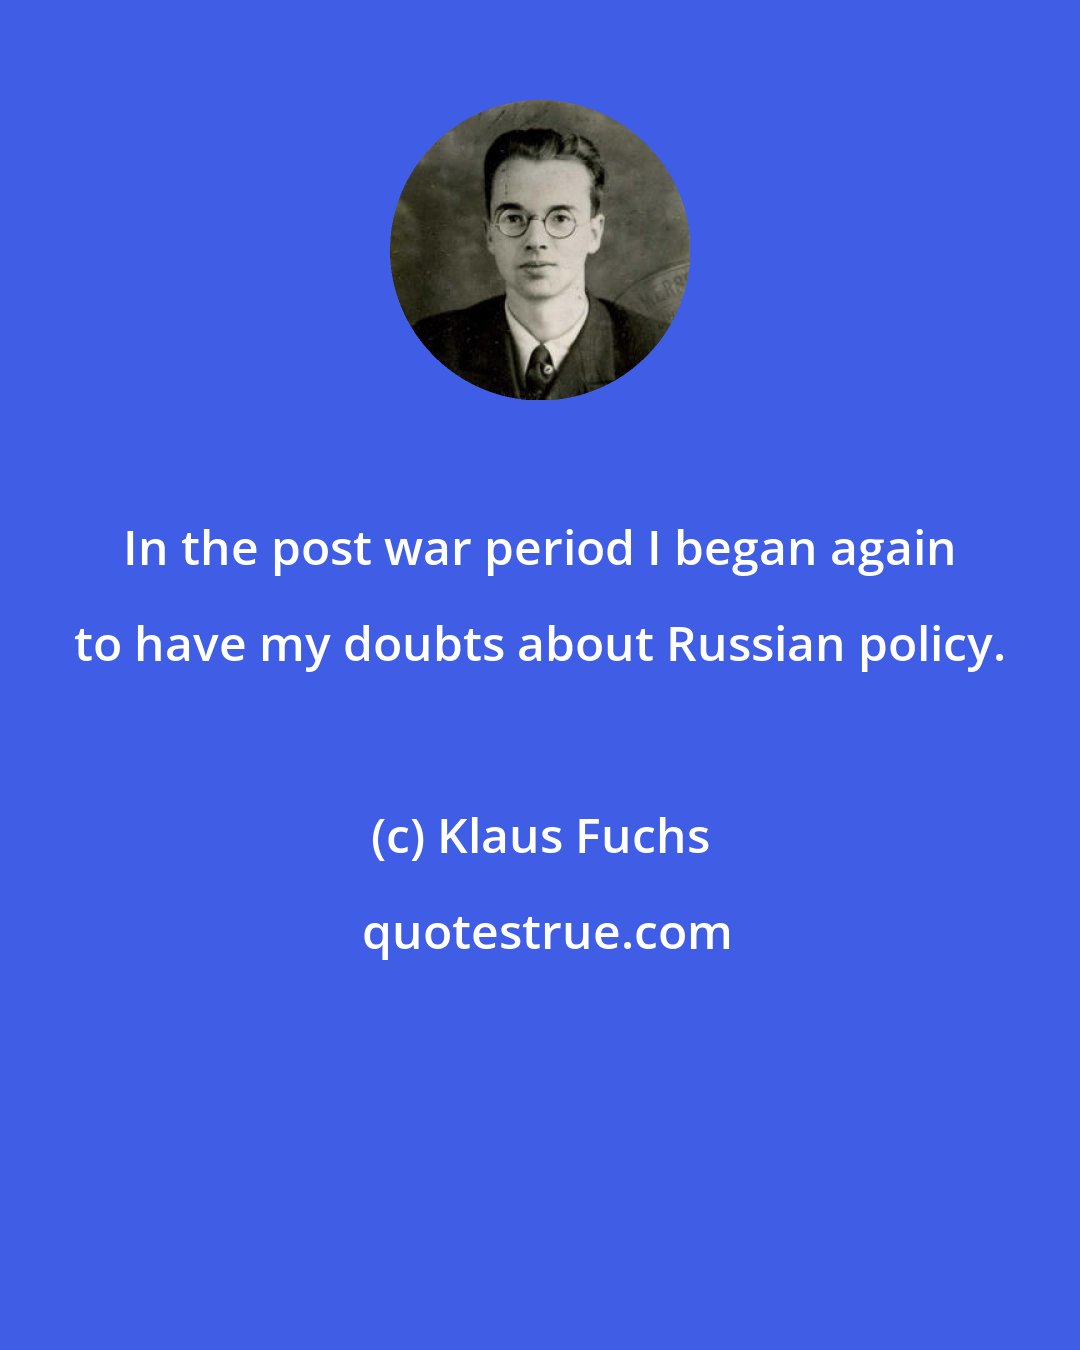 Klaus Fuchs: In the post war period I began again to have my doubts about Russian policy.